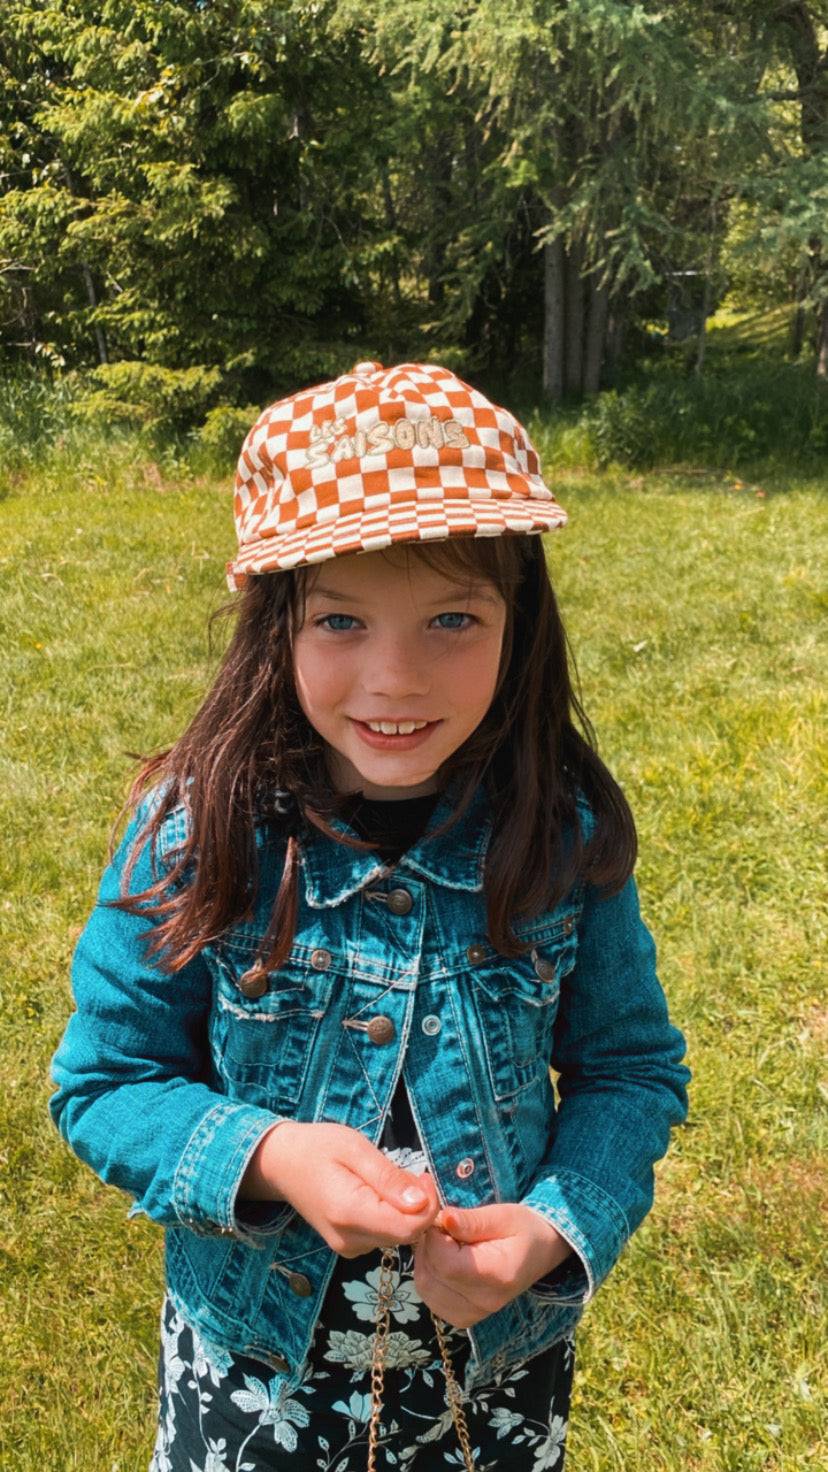 Kids' Checkers Retro Cap | 5 to 13 Years OldKids Cap, checkered pattern, retro look, vintage, Imported from the US, adjustable, Green, Black, Soft, Cotton, lifestyle, outdoor, active, orange